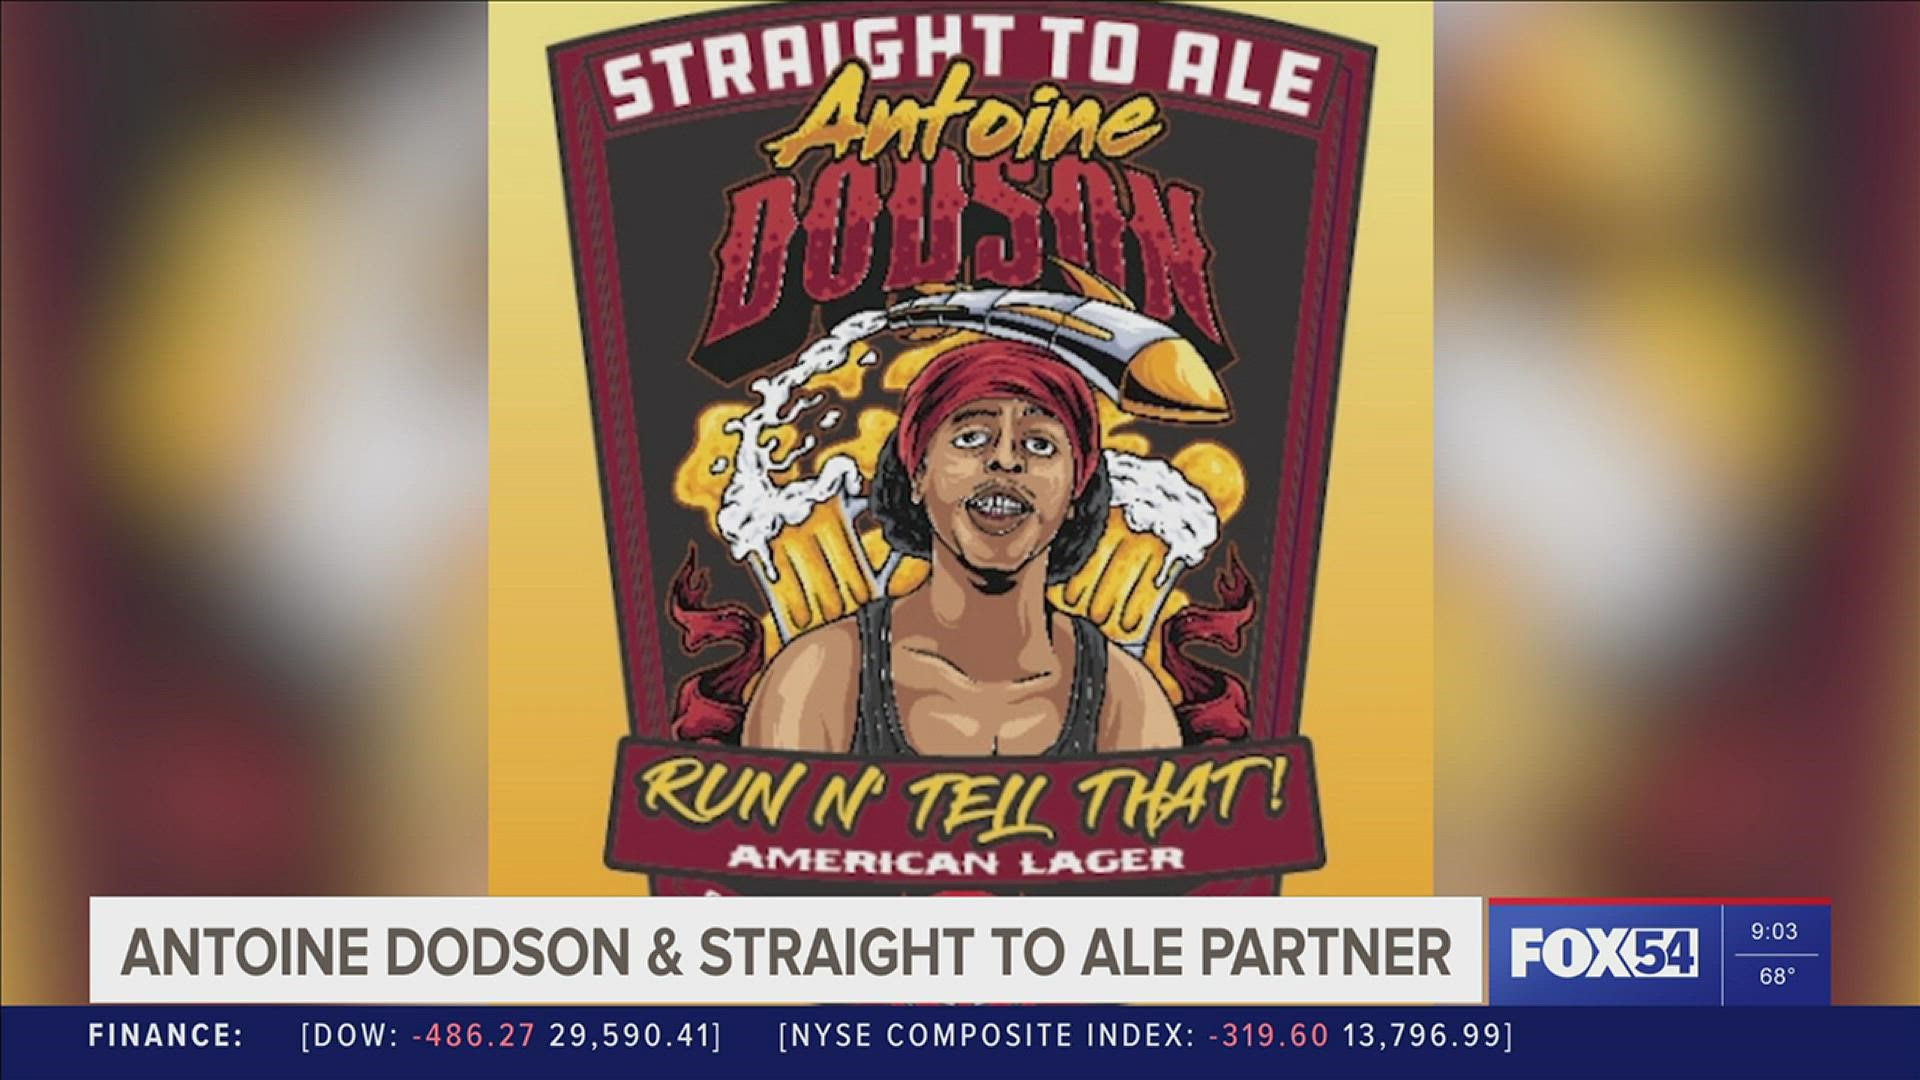 Viral internet star Antione Dodson partners with Straight to Ale.